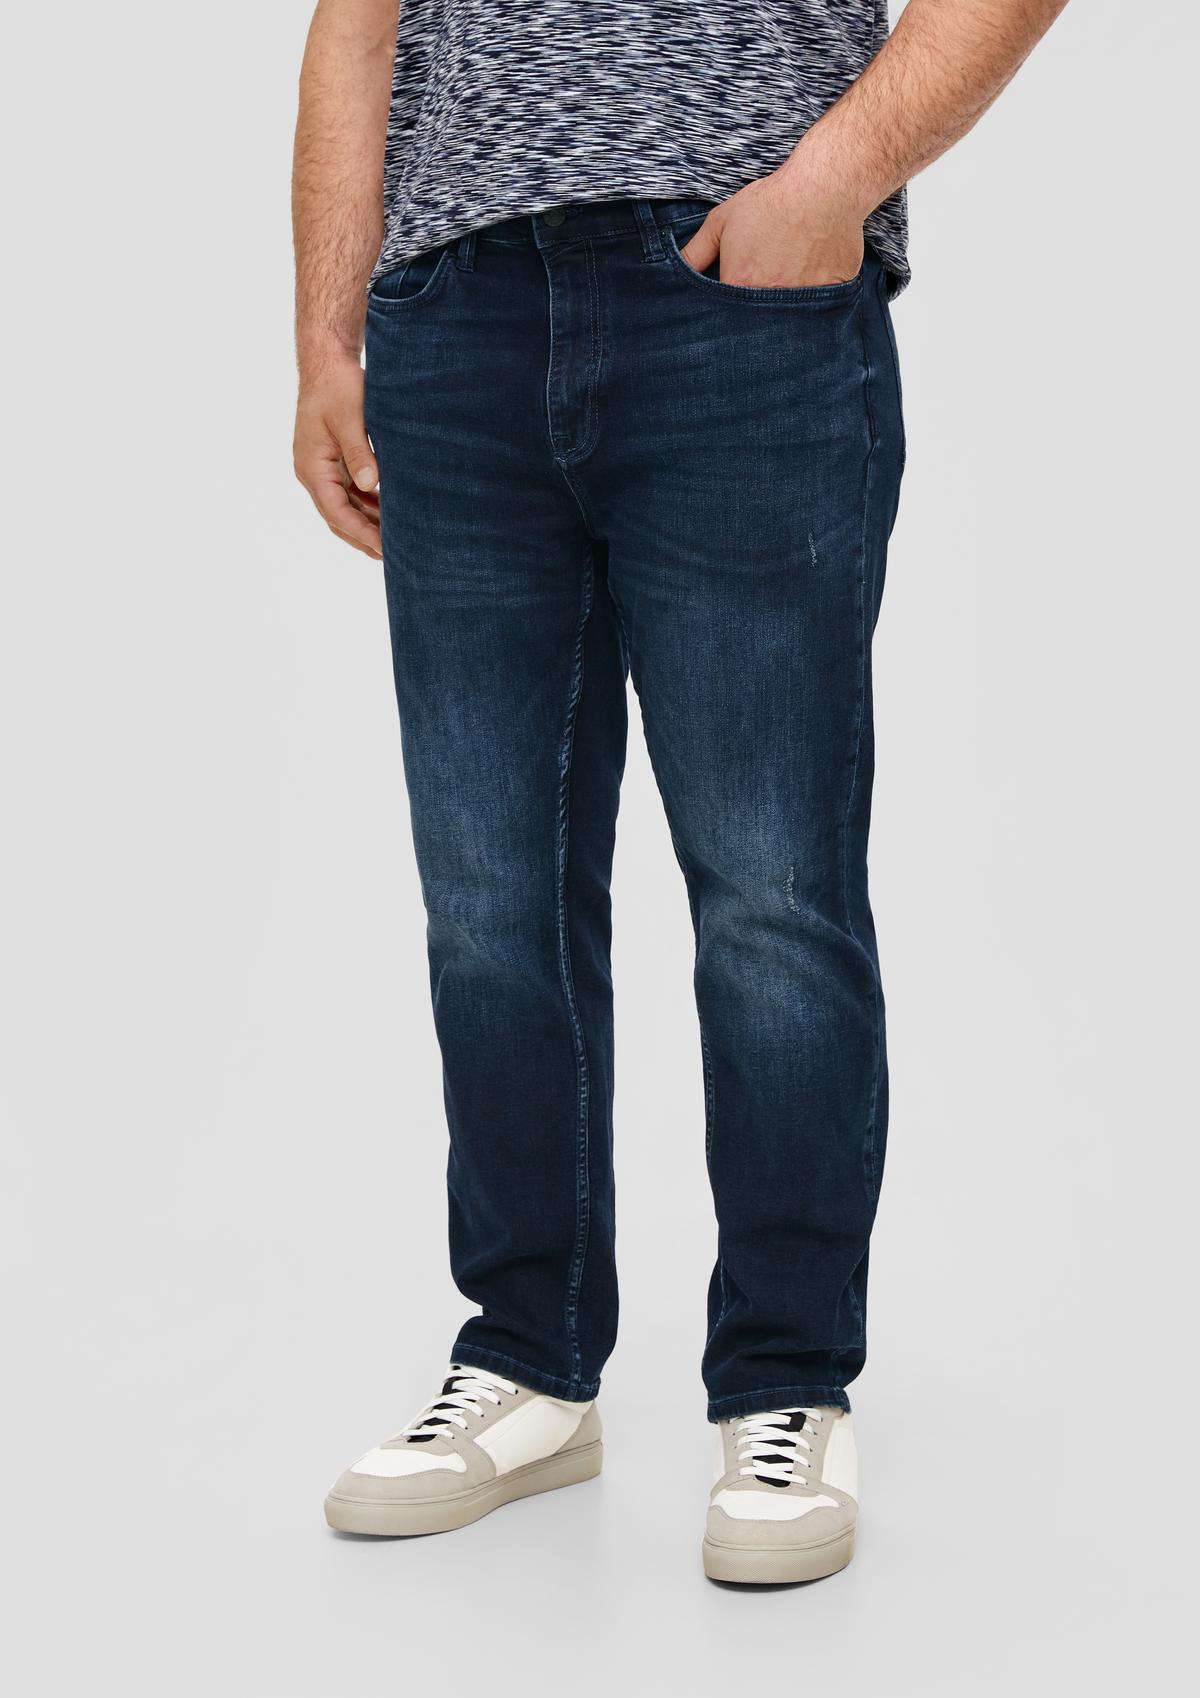 Casby jeans / relaxed fit / mid rise / straight leg